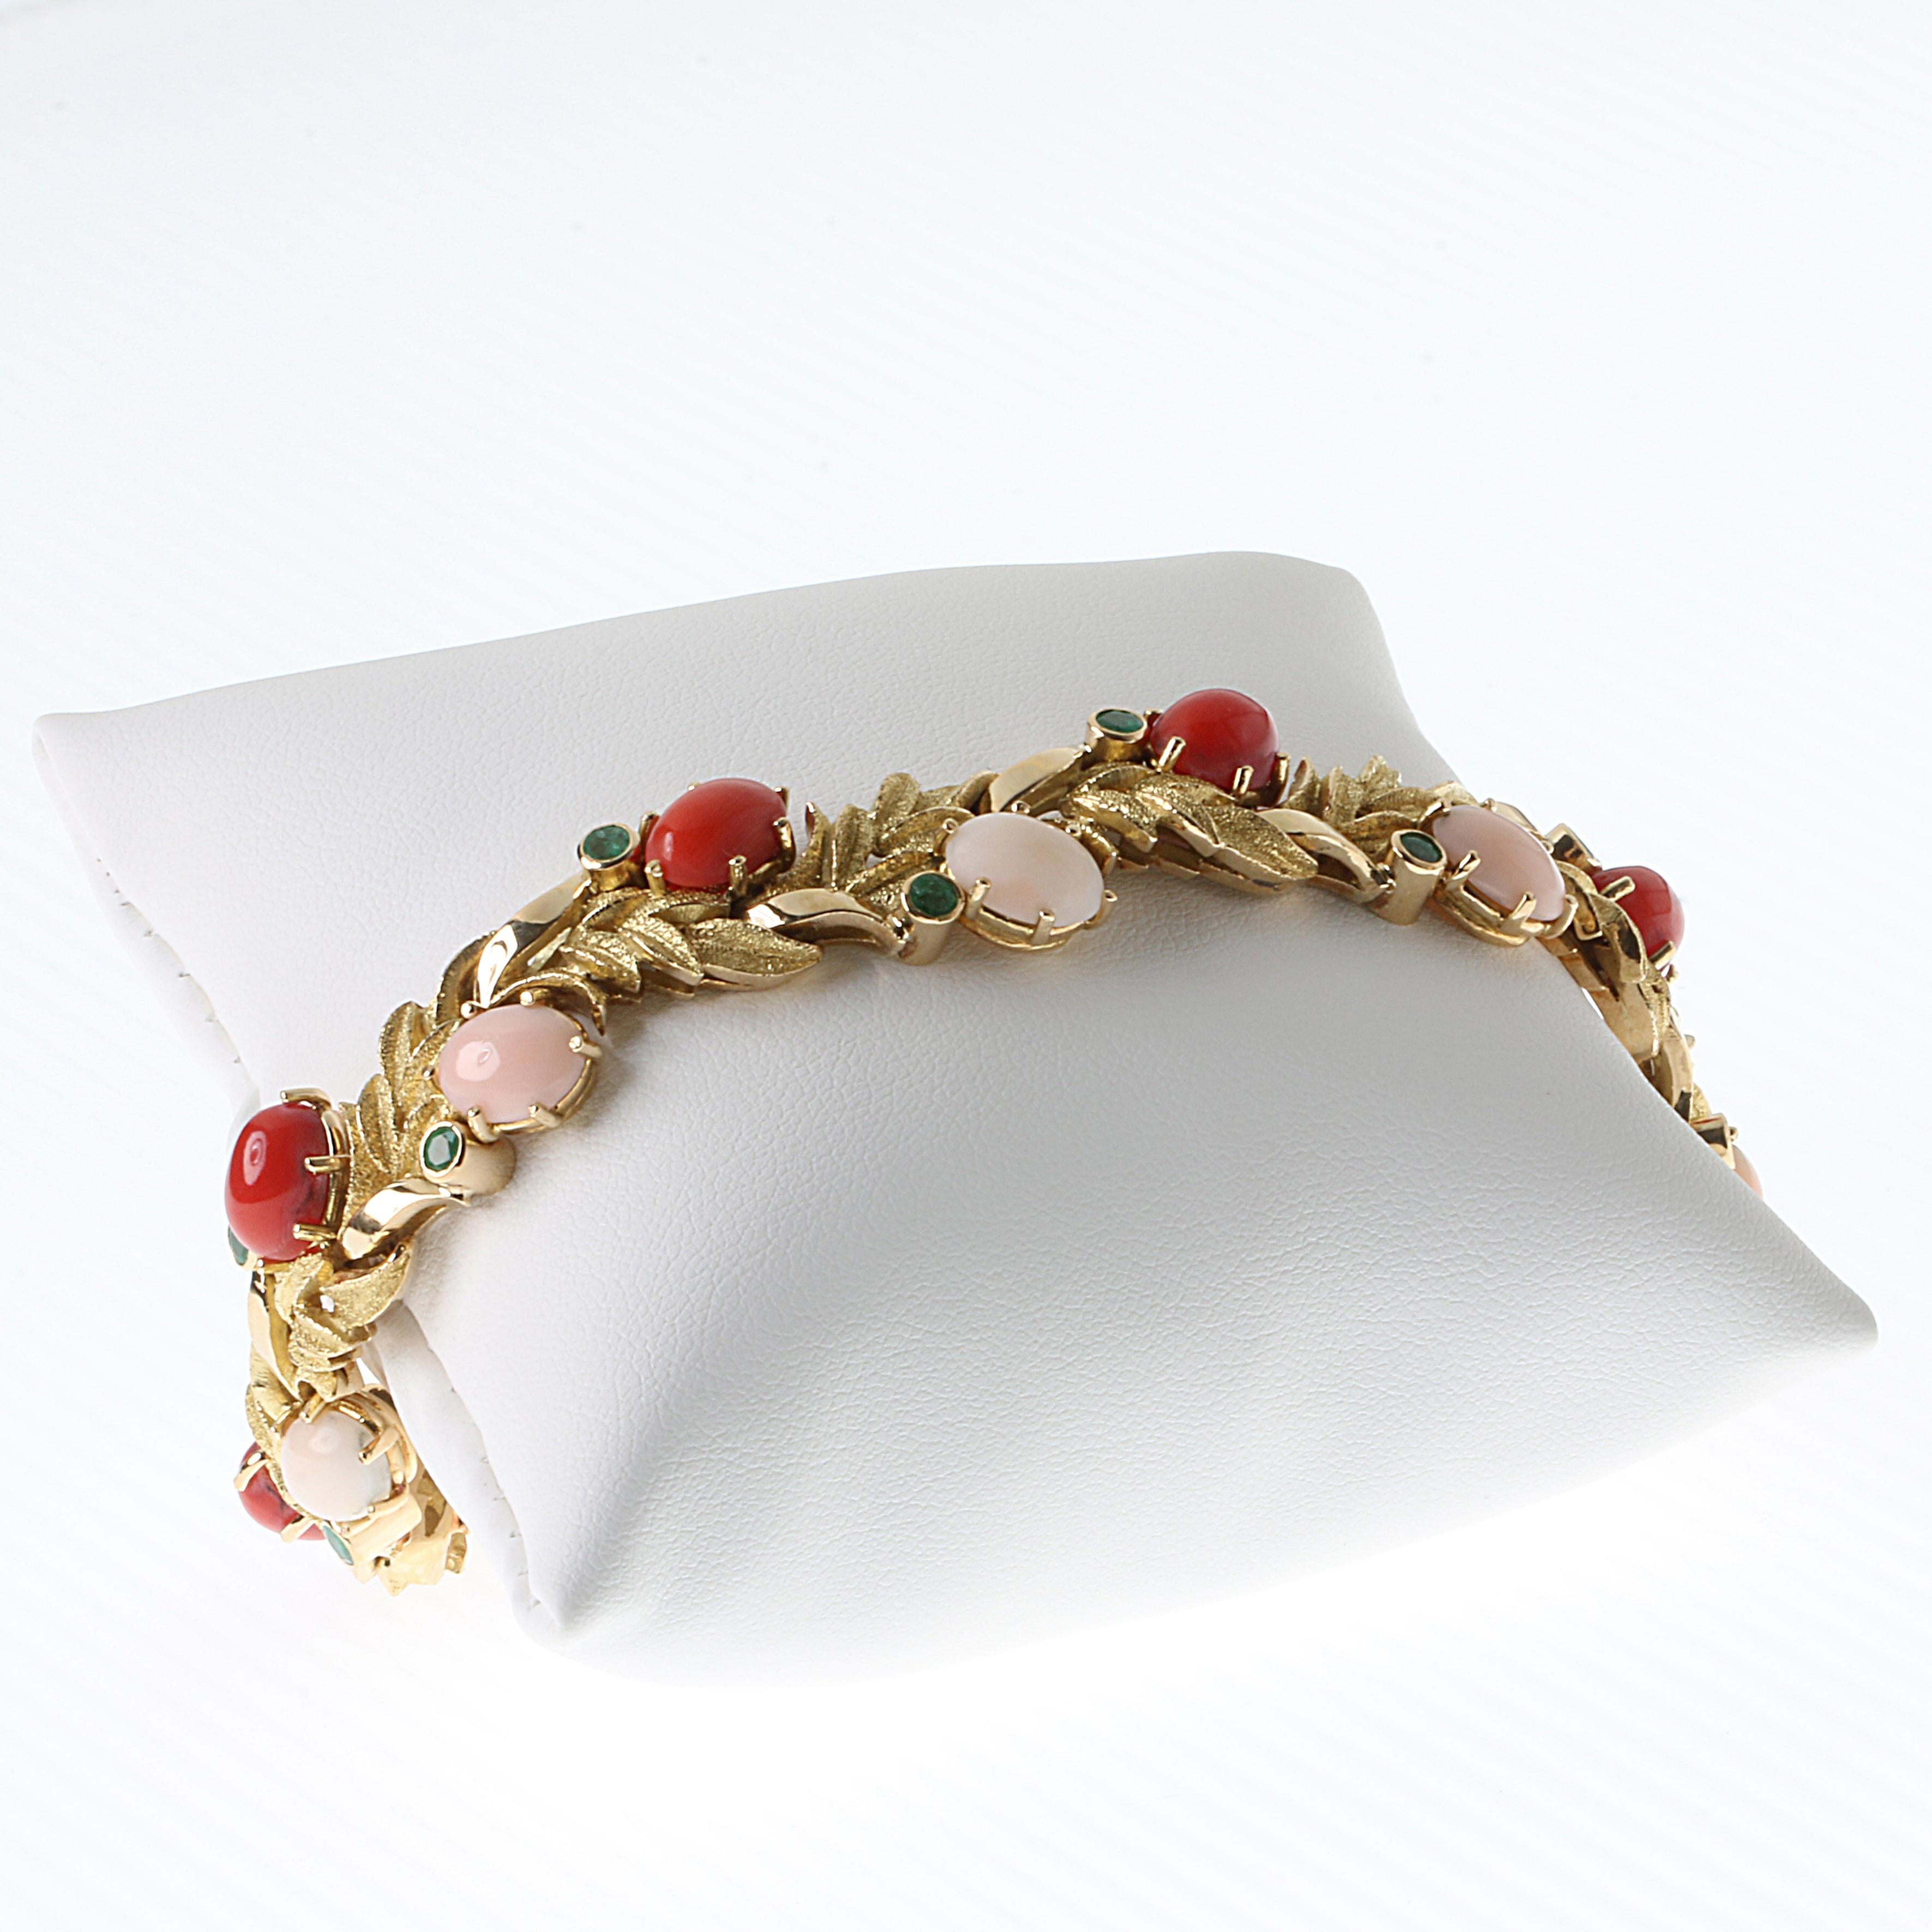 18K yellow gold bracelet with red and pink Meditteranean Coral and Emeralds. 6 red Coral oval cabochons, 6 light-pink Coral oval cabochons, all corals are Corallum Rubrum. 12 Emeralds (Cabochons deep green, transparent and matching color:  0.24cts